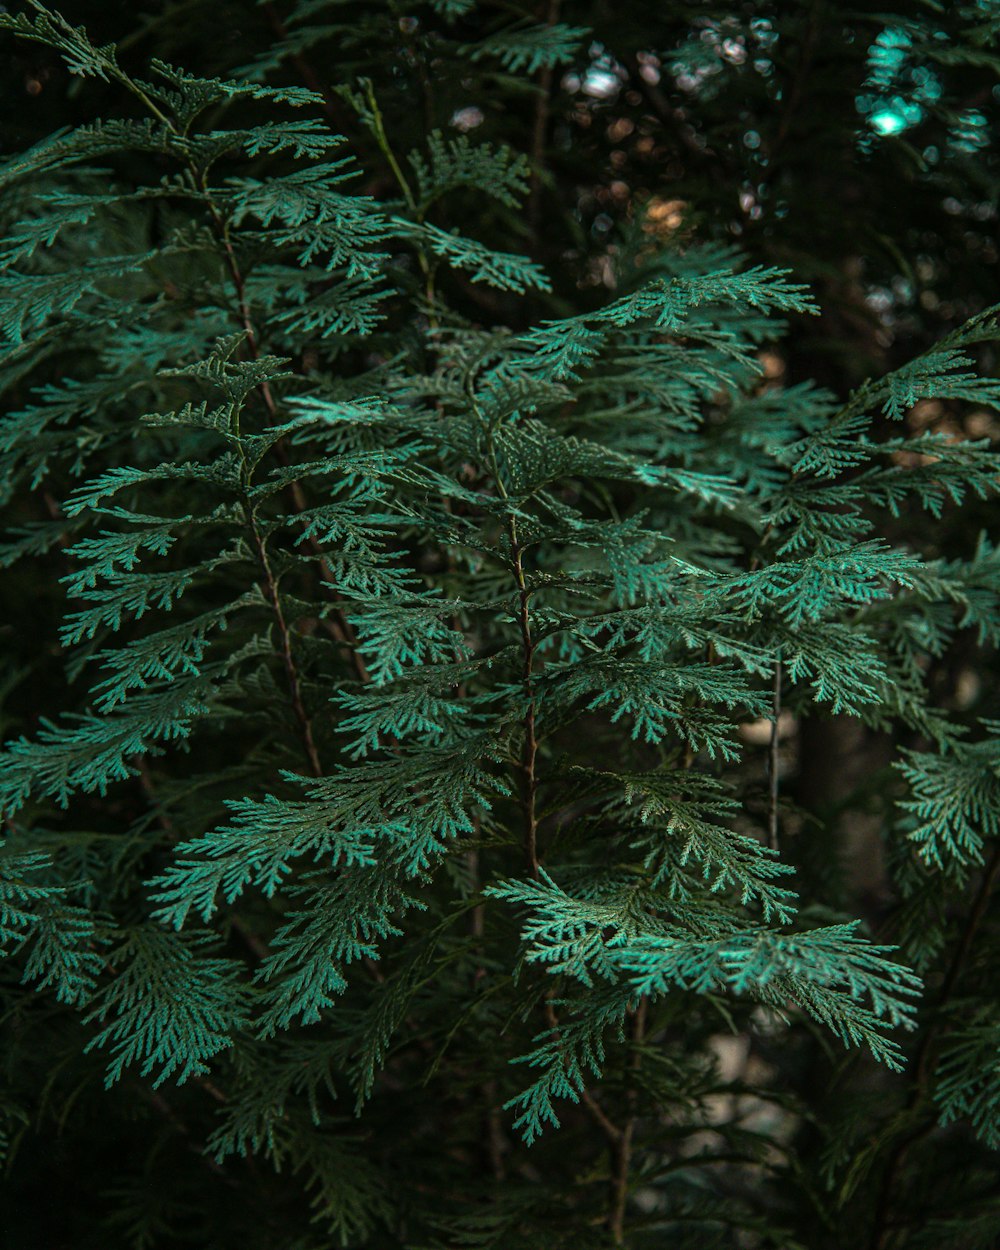 a close up of a pine tree with green needles